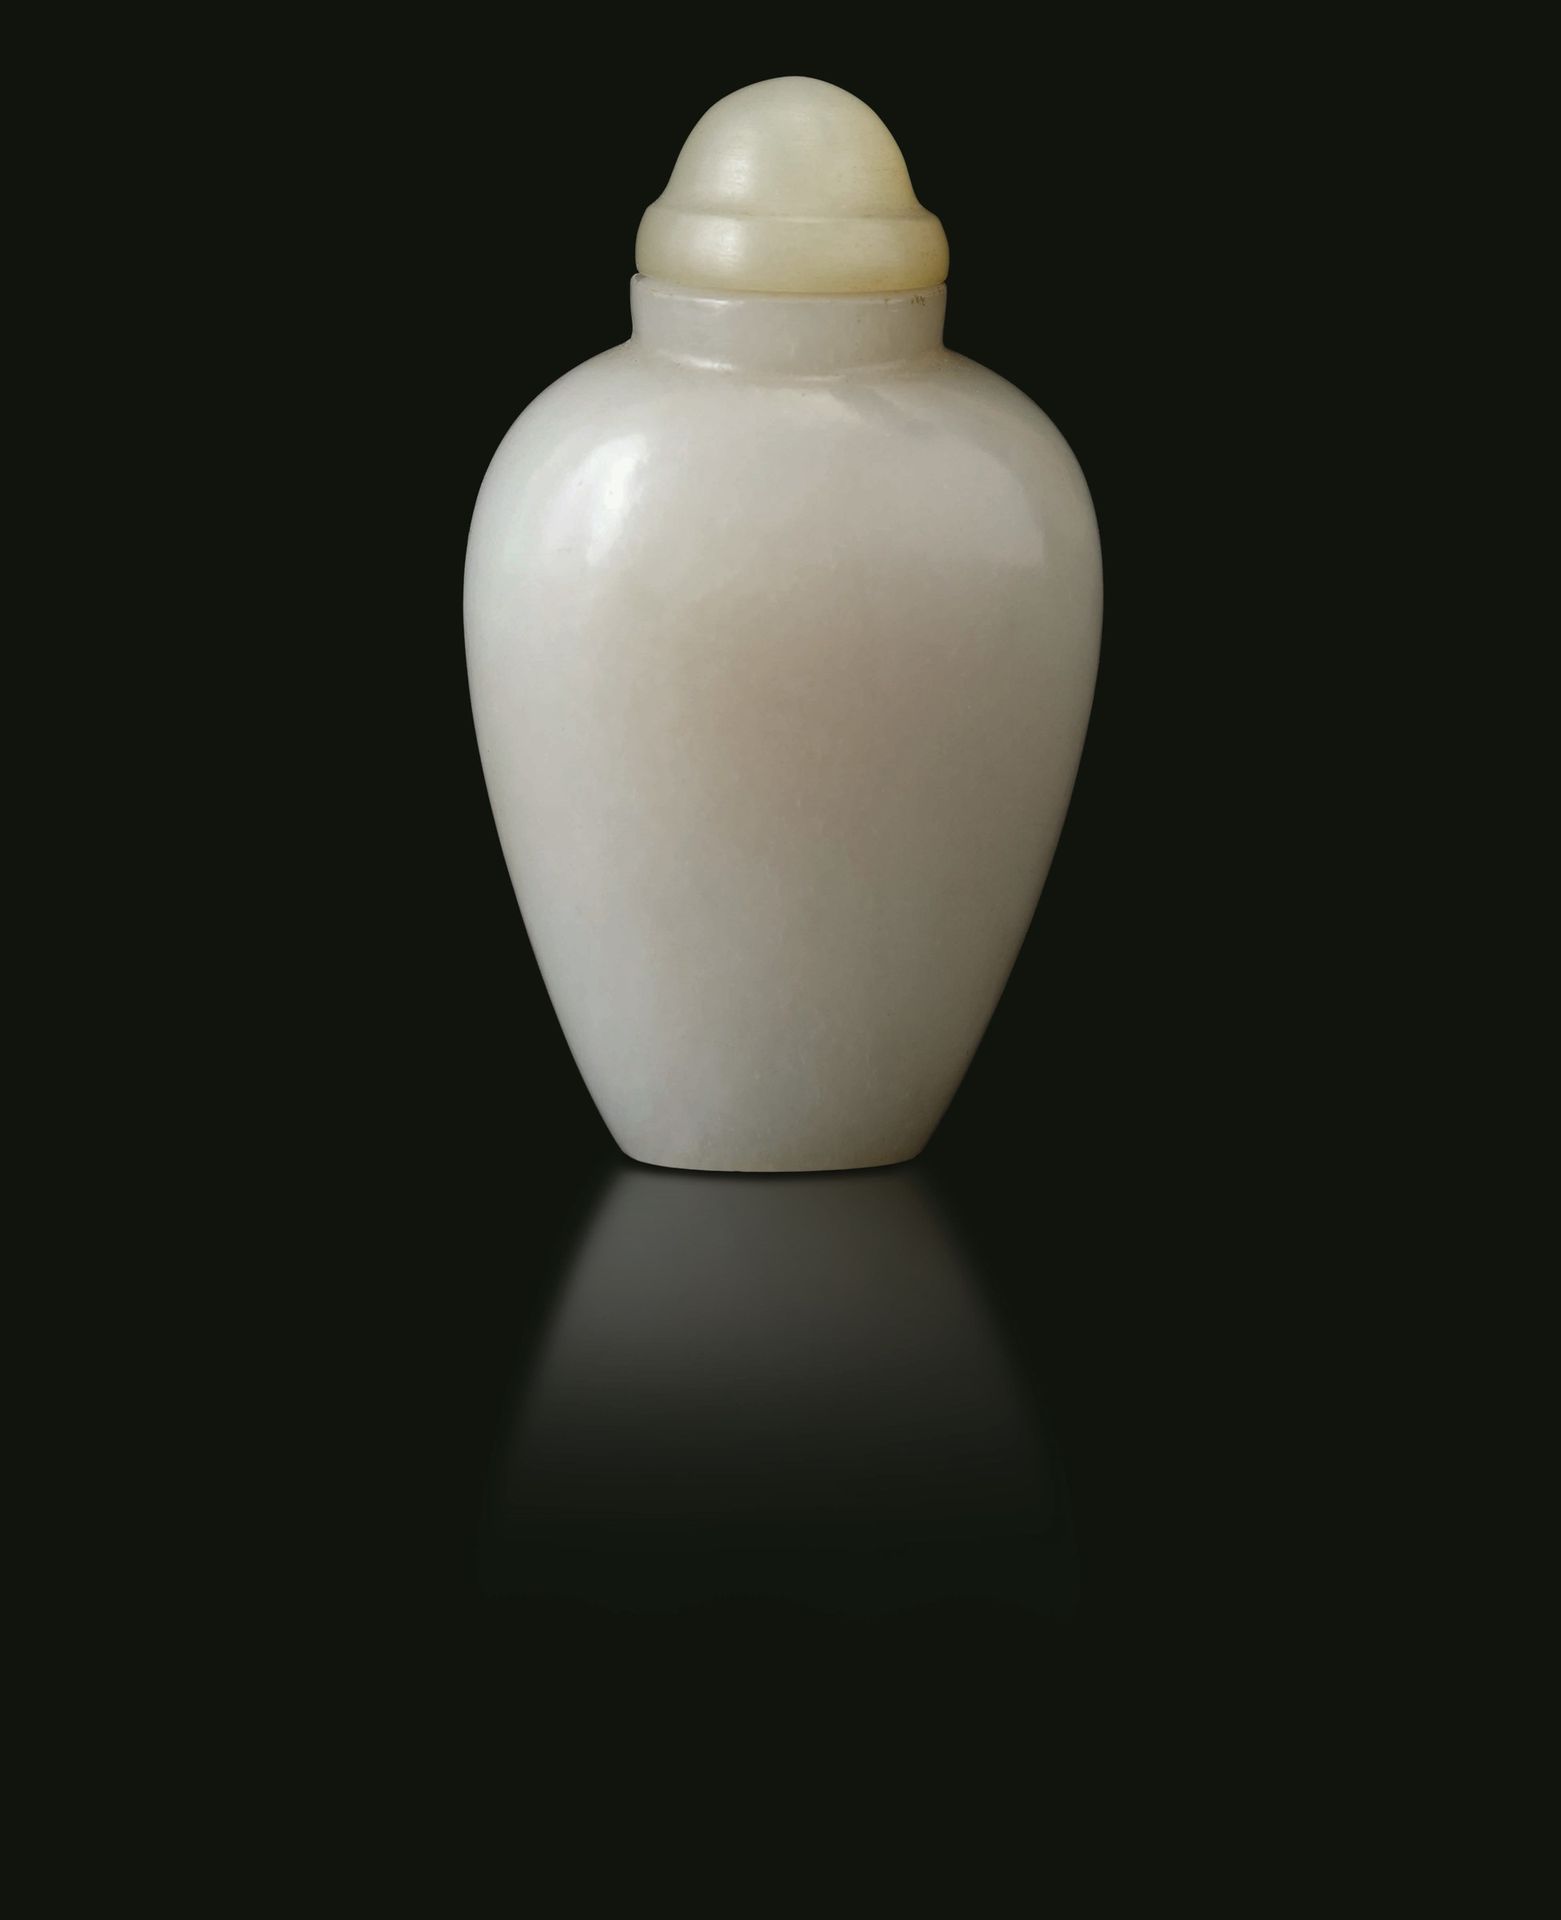 A white jade snuff bottle, China, Qing Dynasty 1800s. H 6,5cm